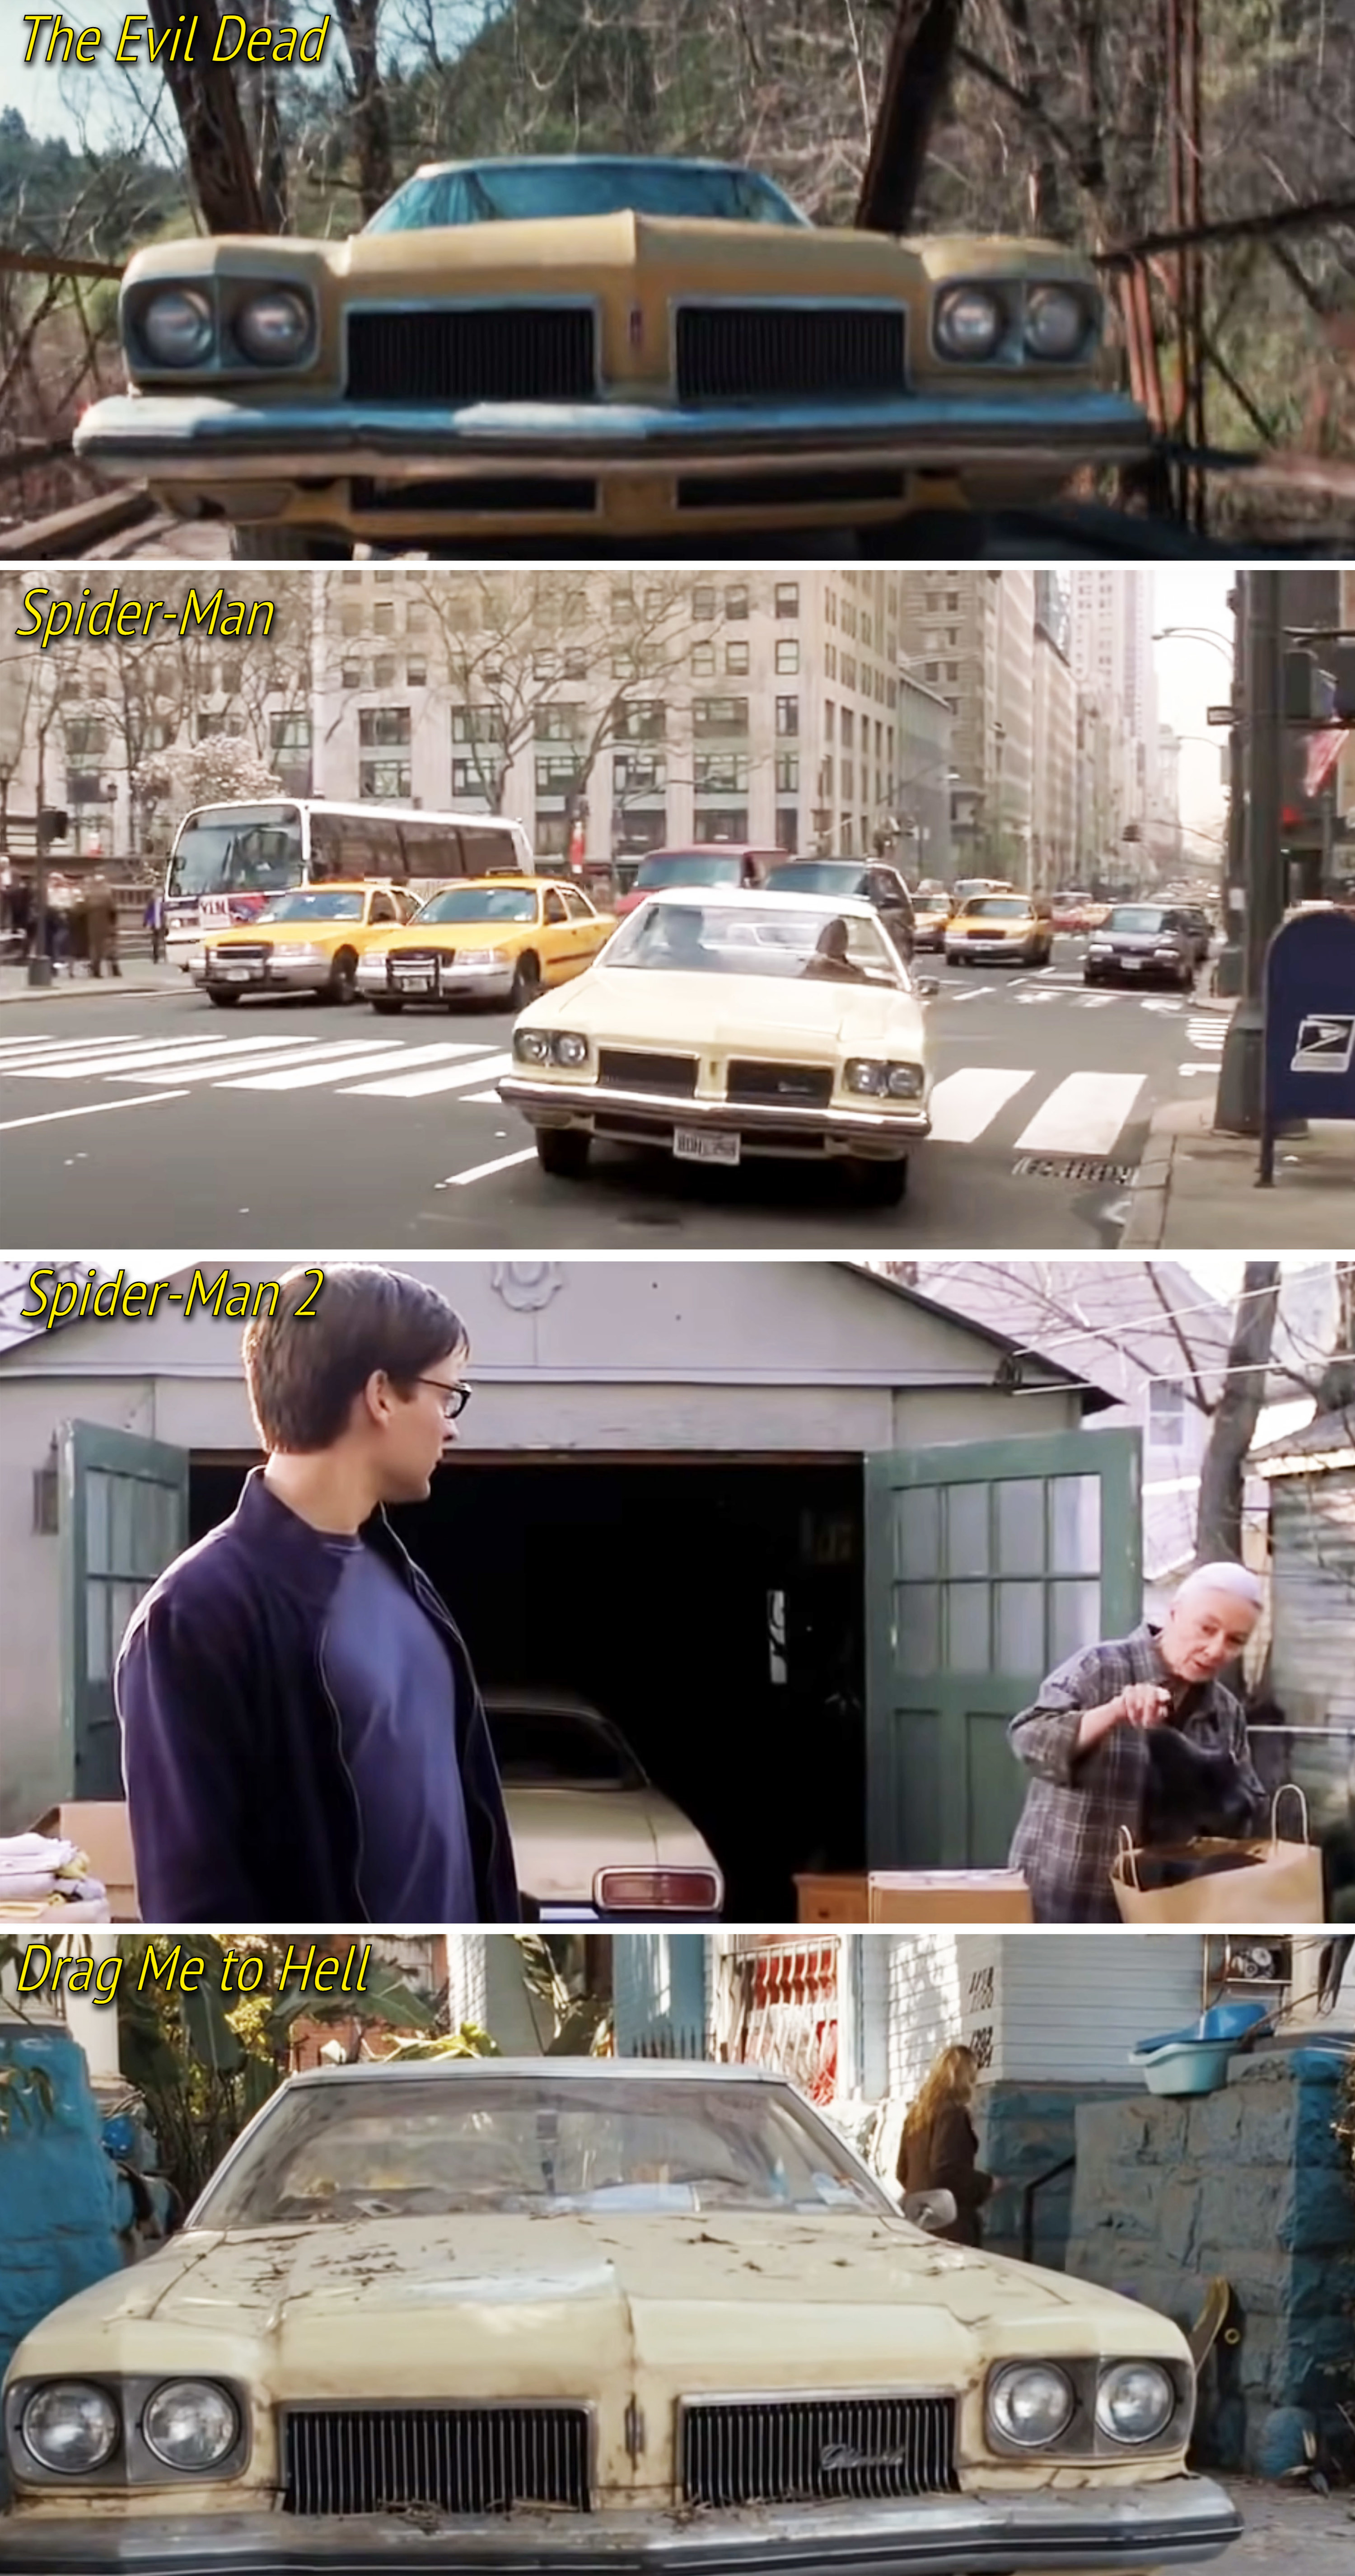 The Oldsmobile in &quot;The Evil Dead,&quot; then in &quot;Spider-Man,&quot; then in &quot;Spider-Man 2&quot; and then in &quot;Drag Me to Hell&quot;